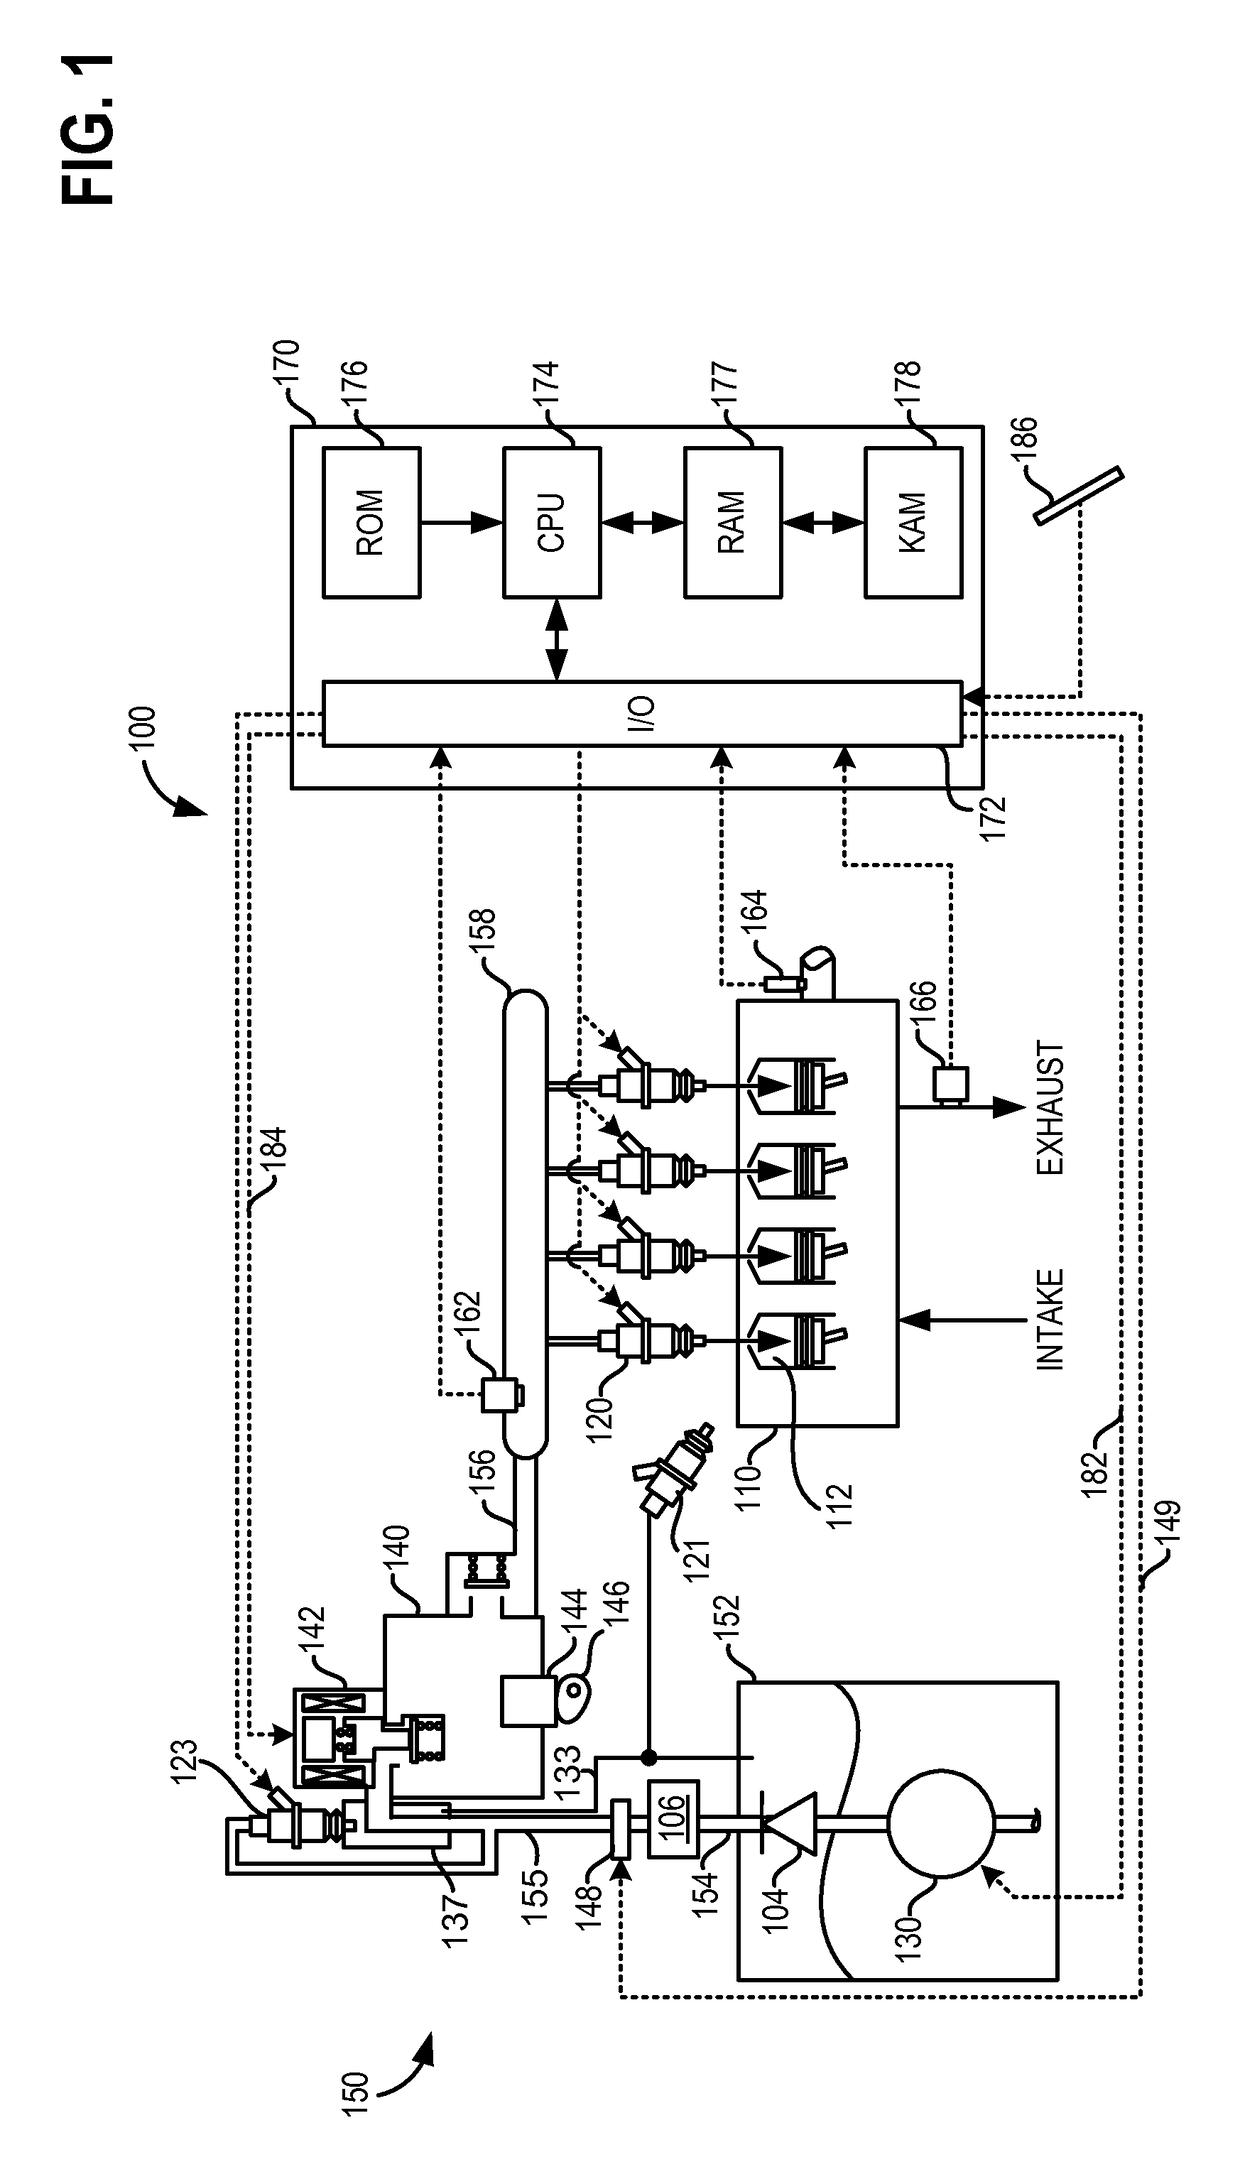 Method and system for supplying liquefied petroleum gas to a direct fuel injected engine